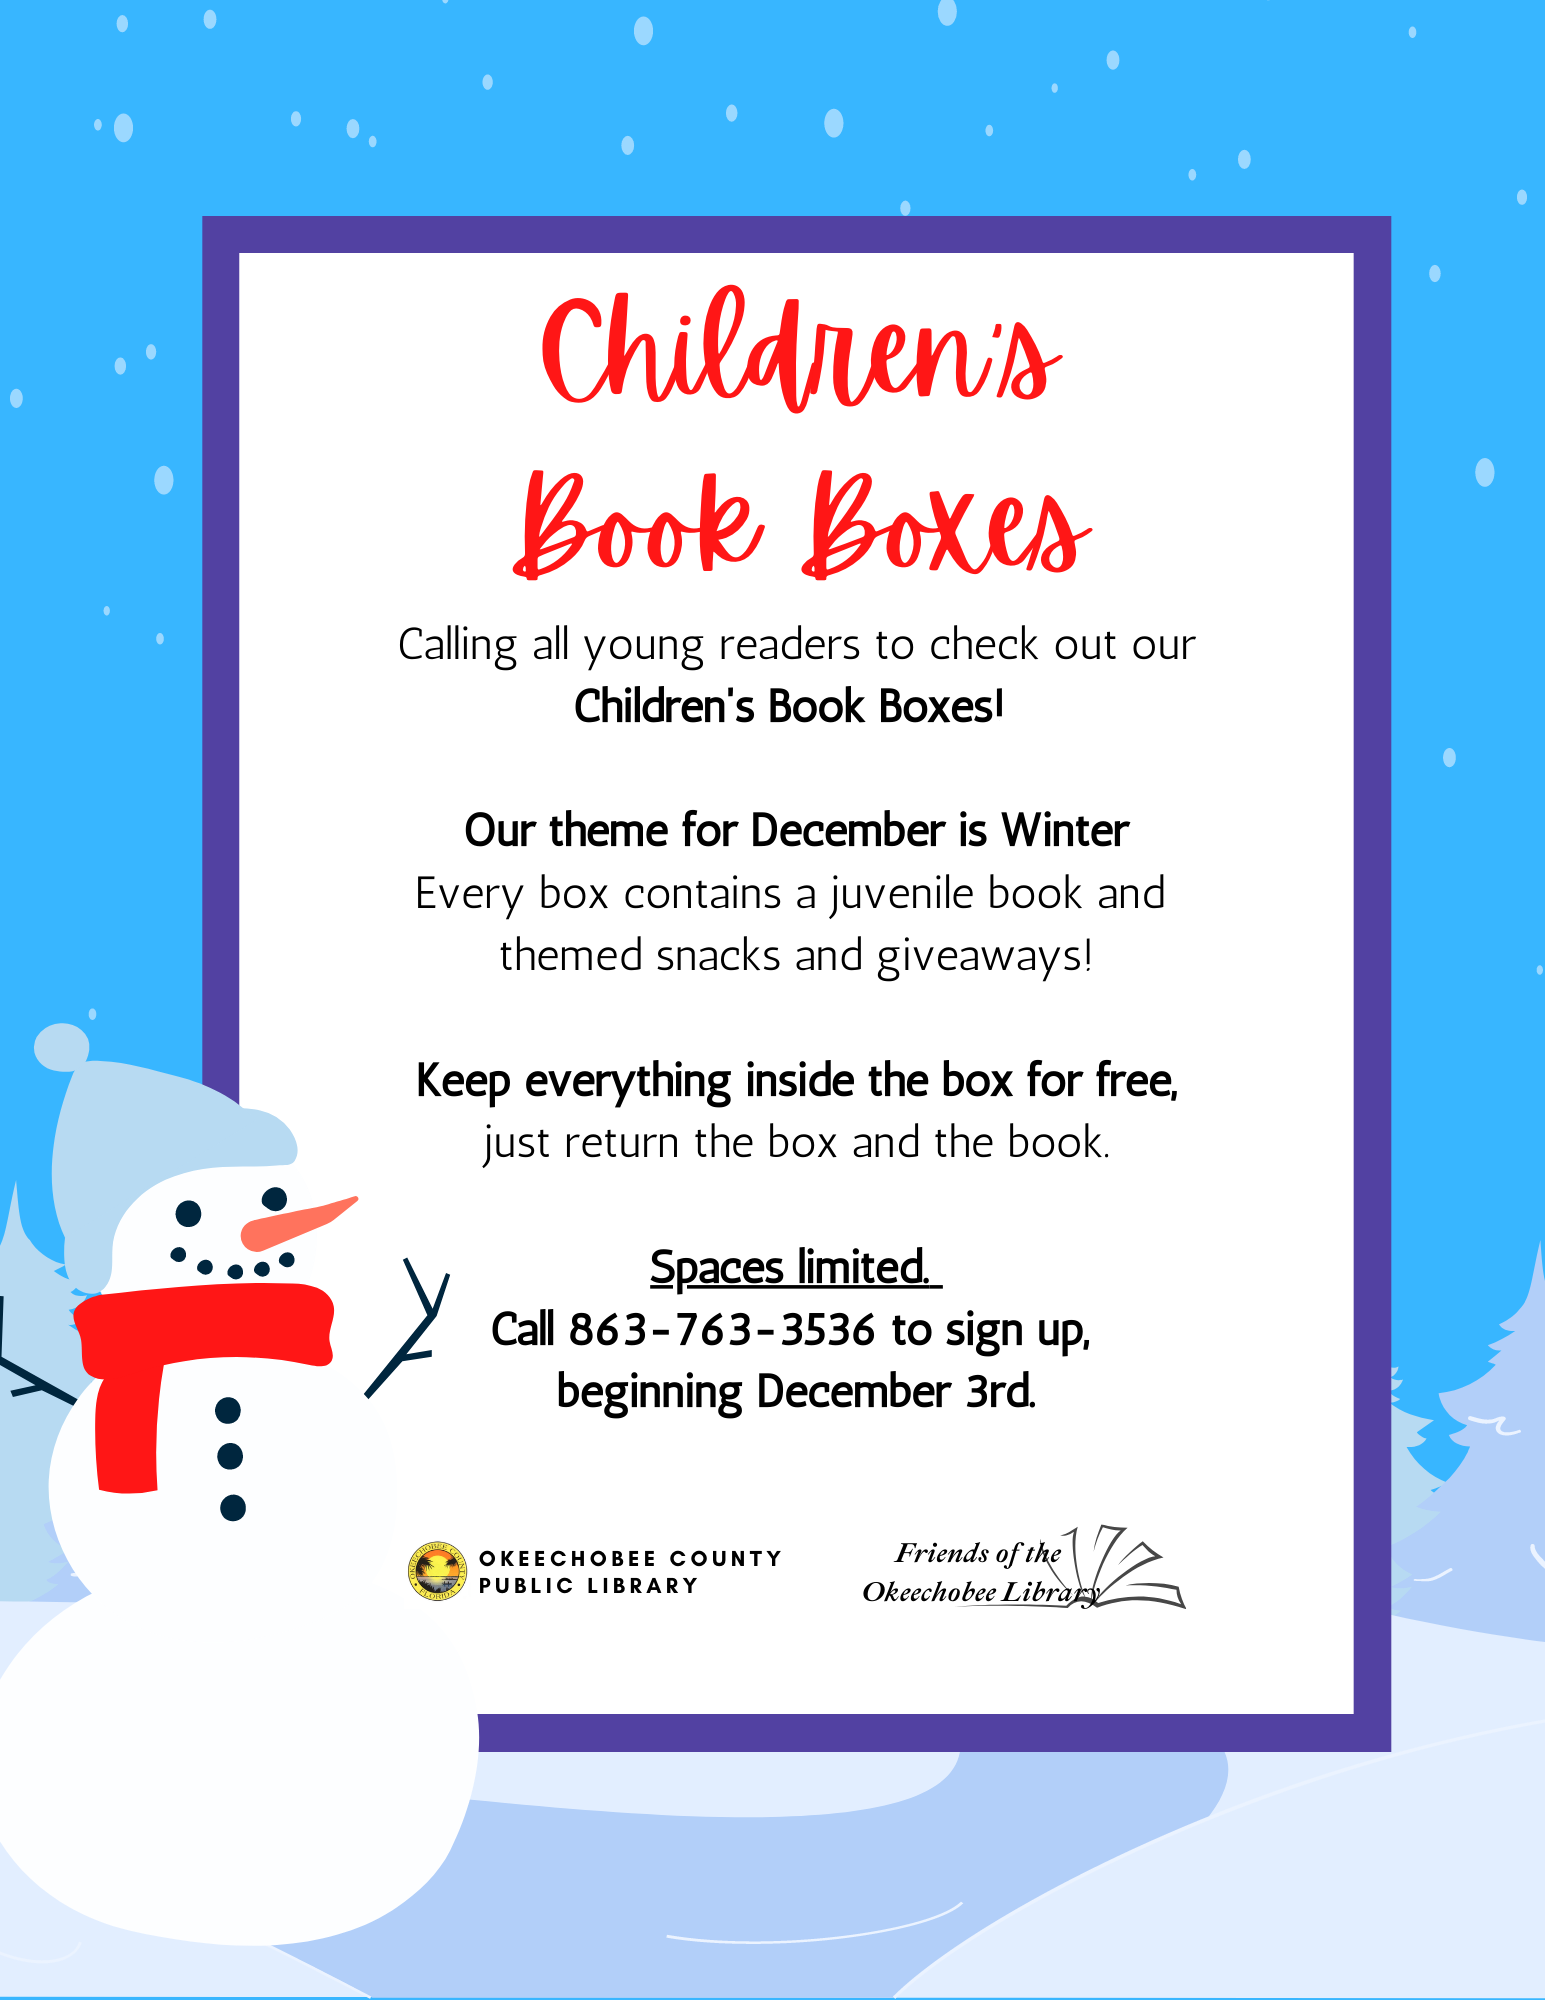 "December Children's Book Boxes! December's theme is winter! Every box contains a juvenile book and themed snacks and giveaways!"